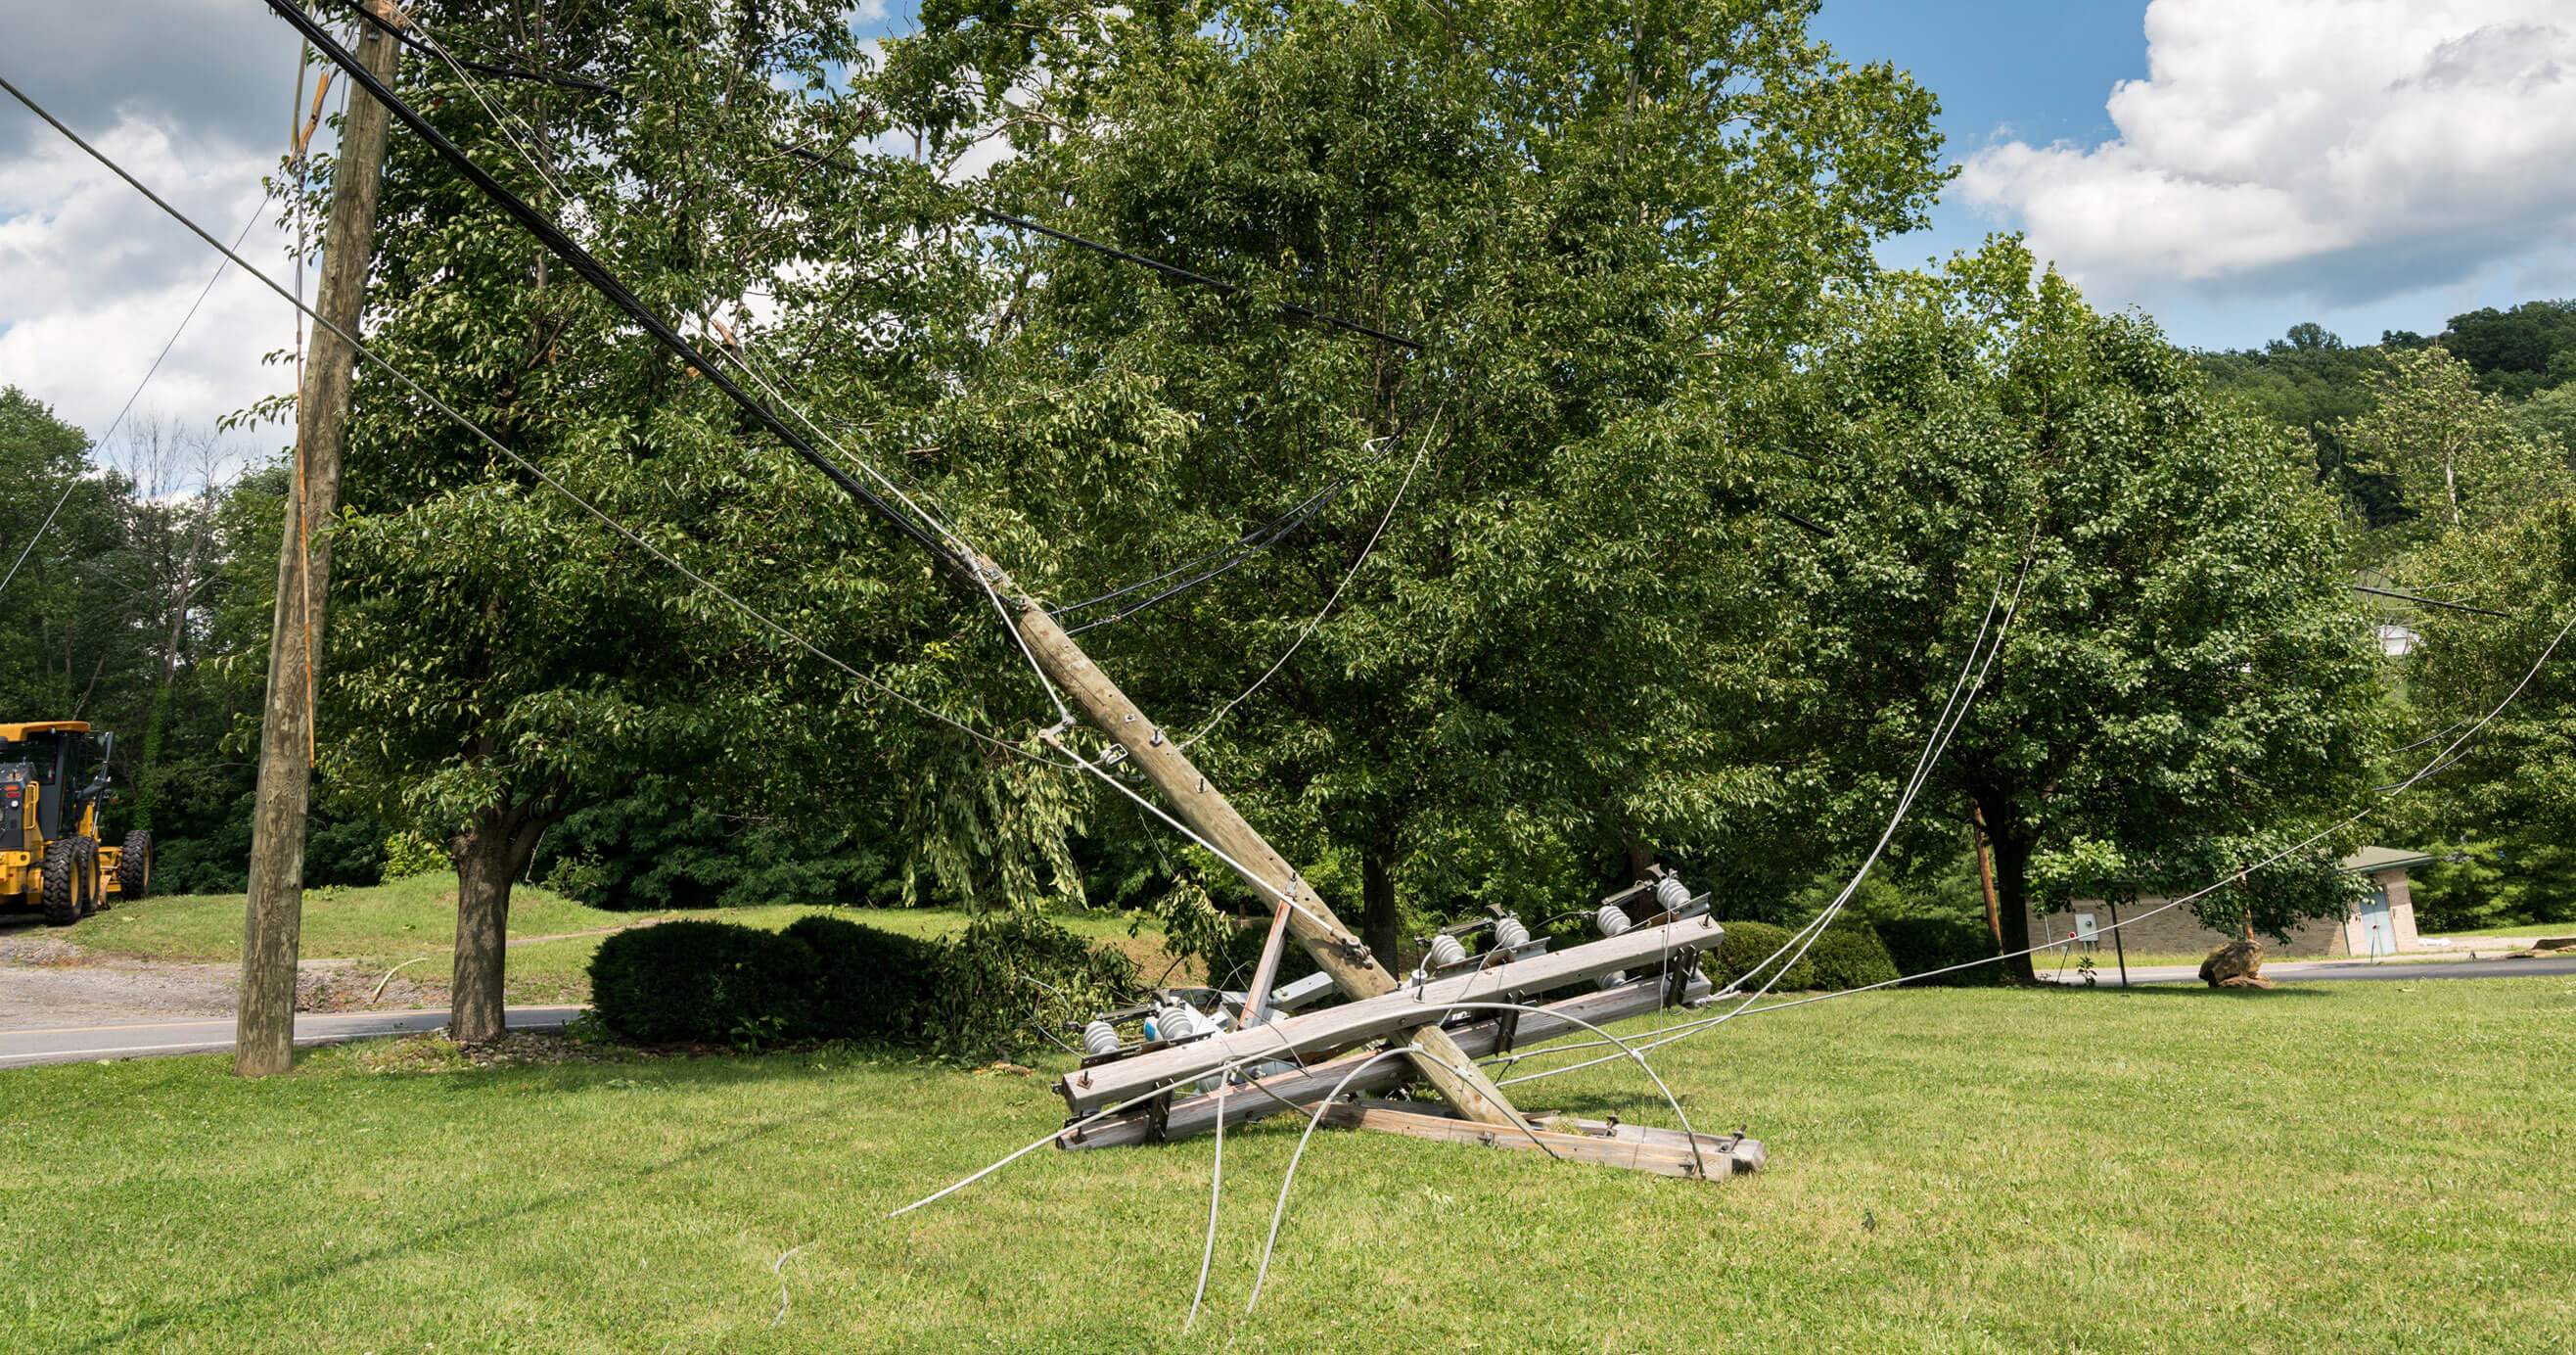 Power lines down